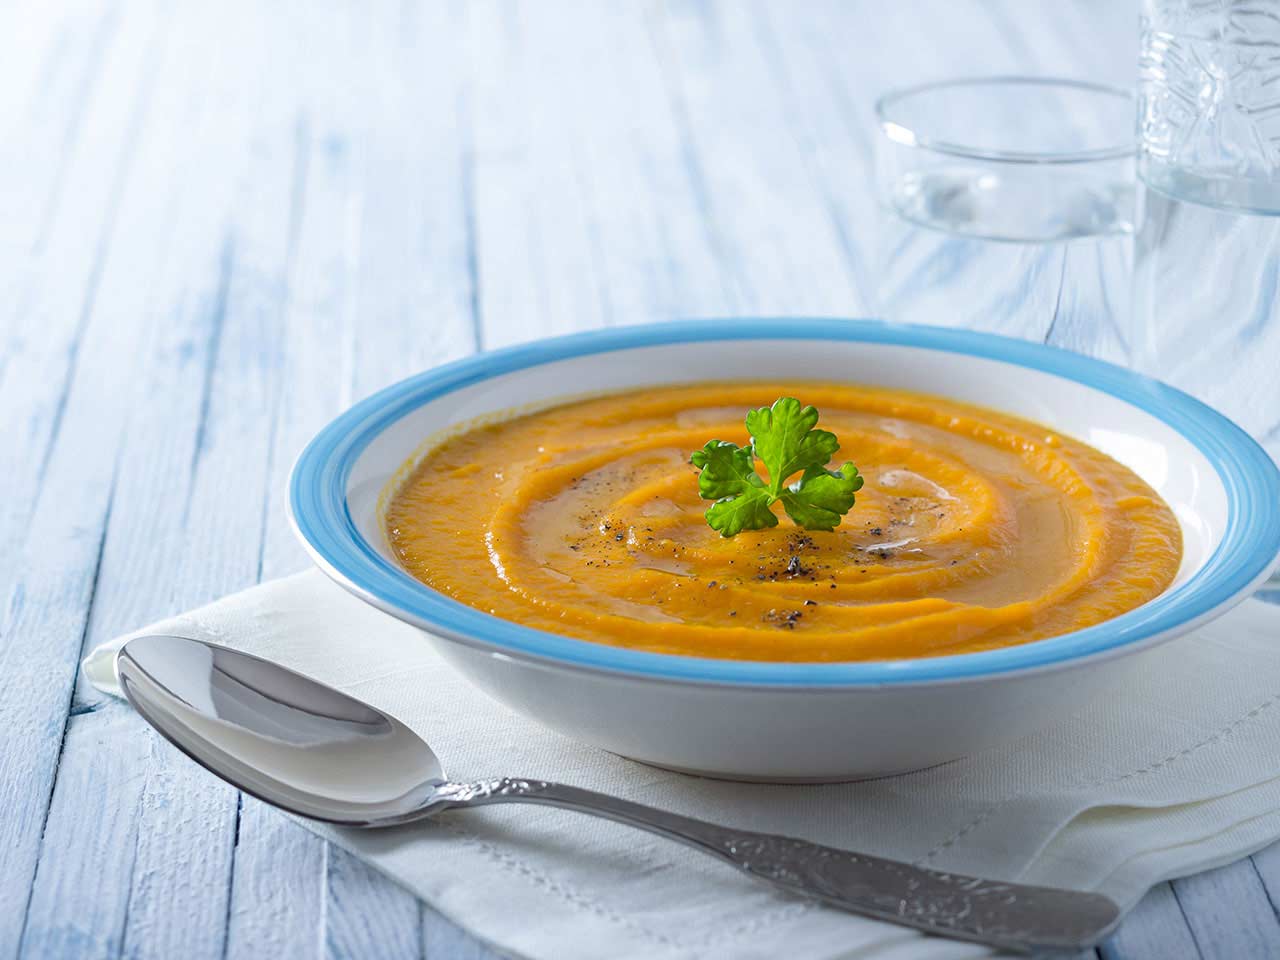 Bowl of carrot soup on wooden table